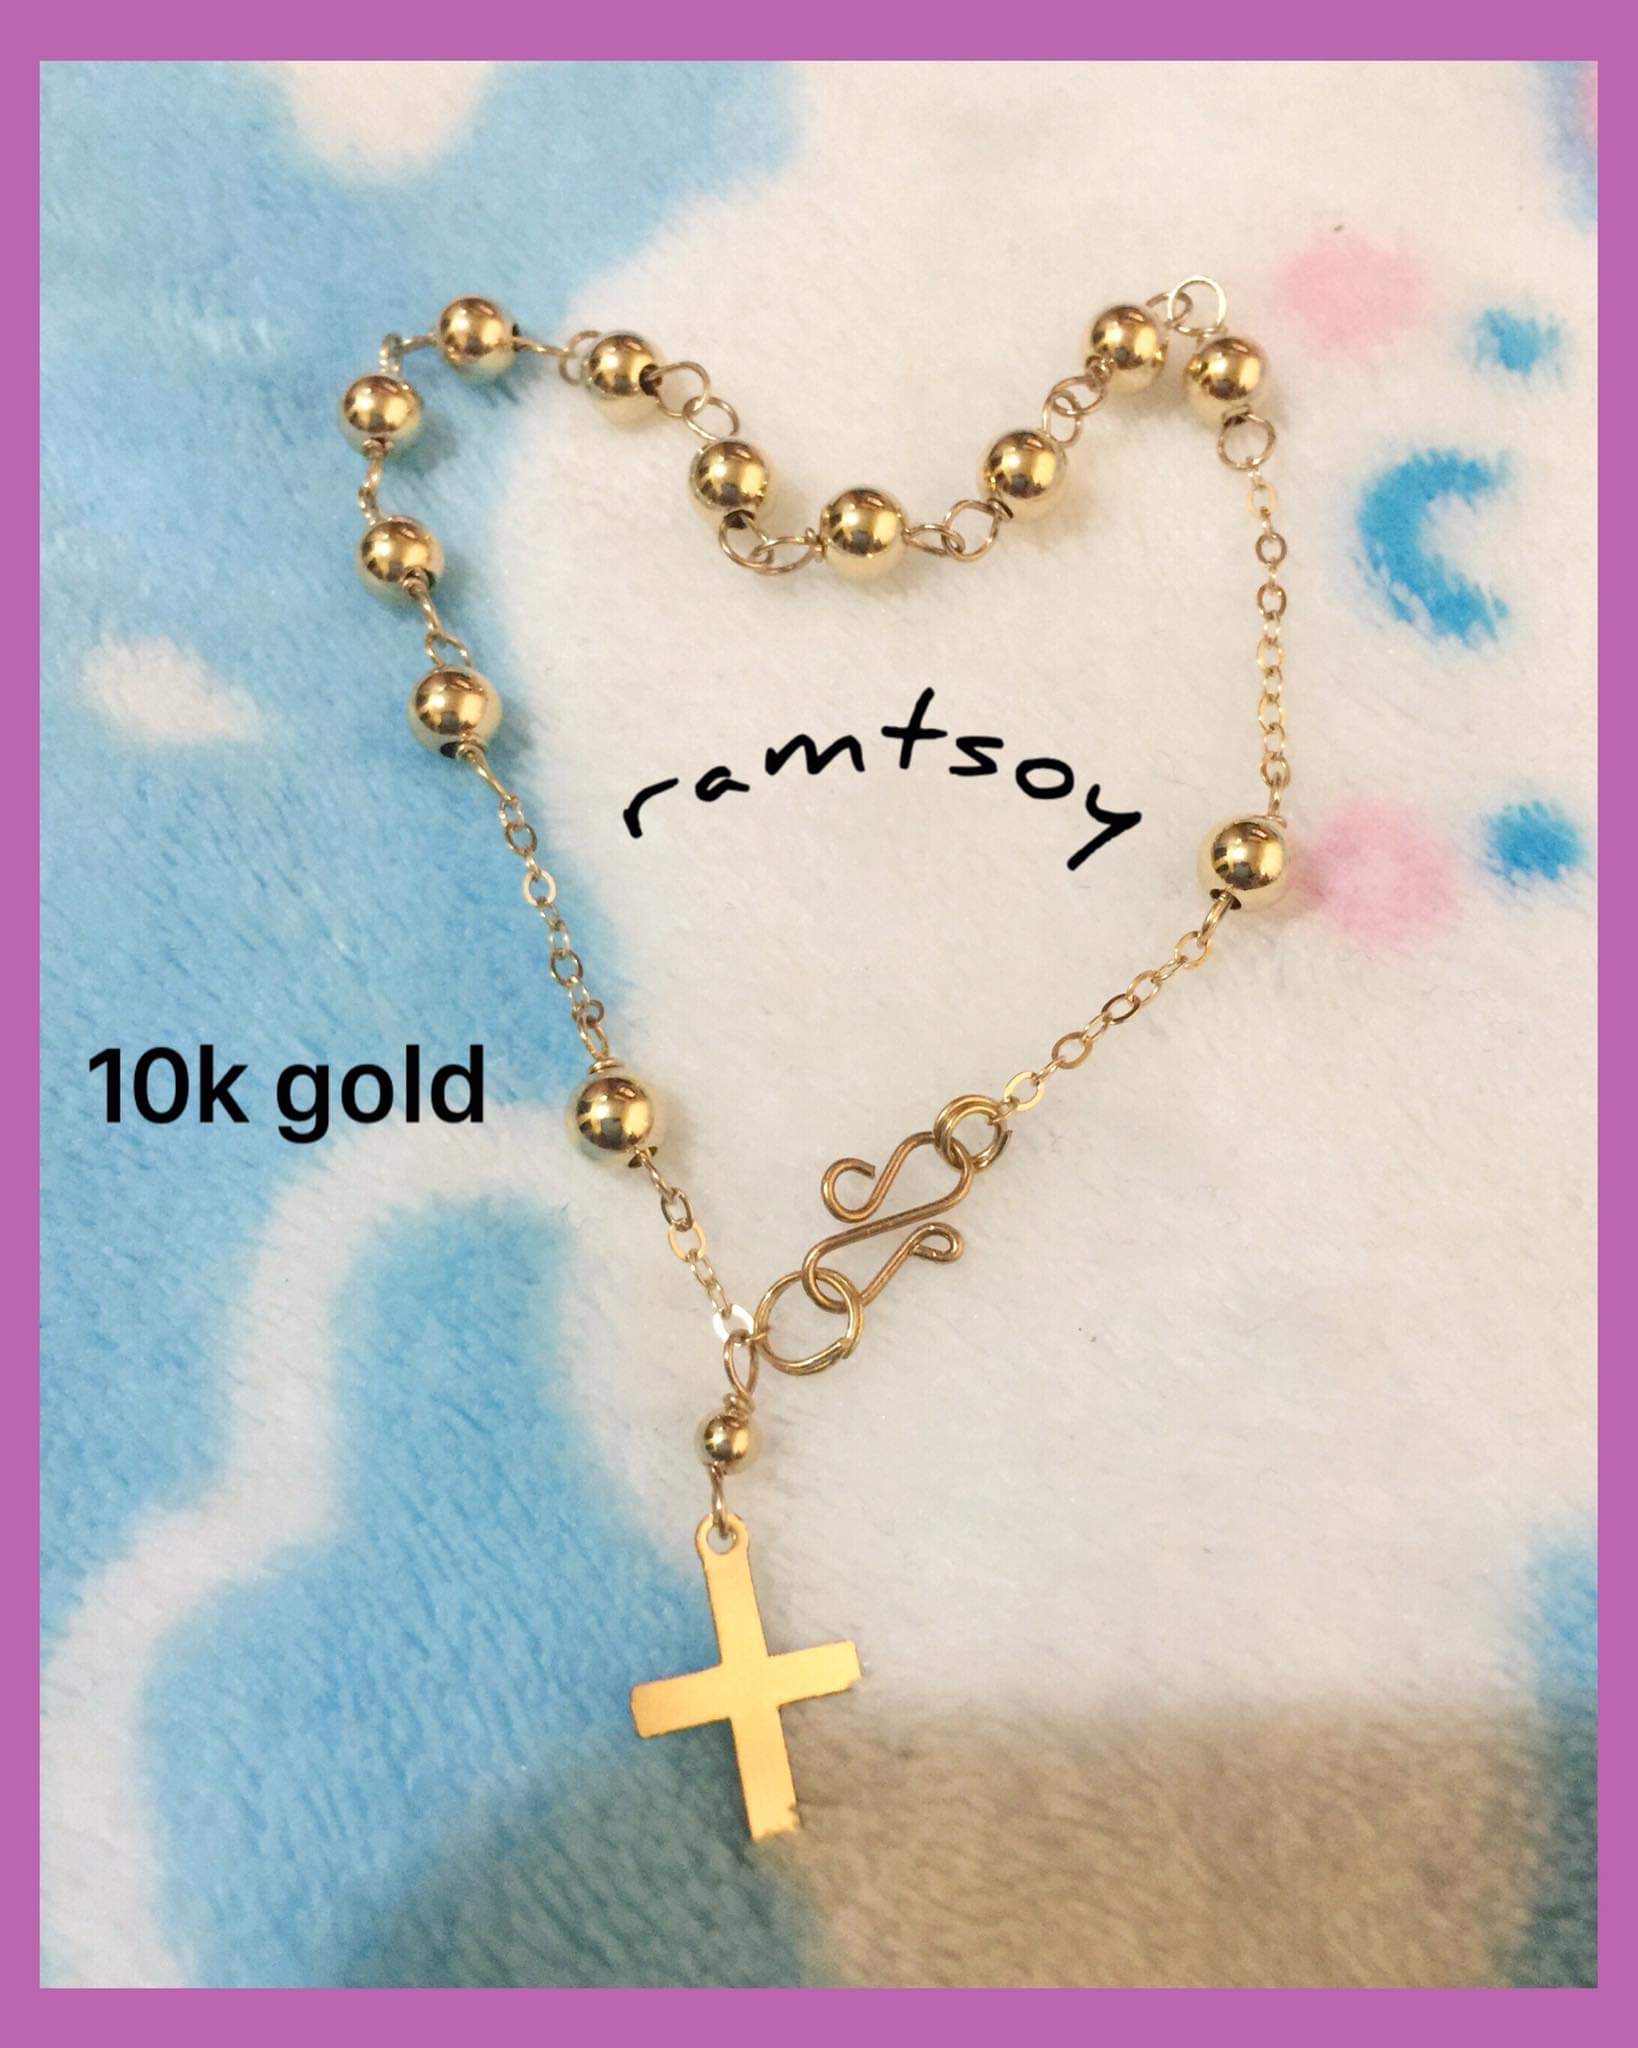 OOKWE Adjustable Elastic Rope Chain Rosary Bracelet with for Cross Made of  Pine Beads and Alloy Wristband Jewelry Gift Bring L - Walmart.com